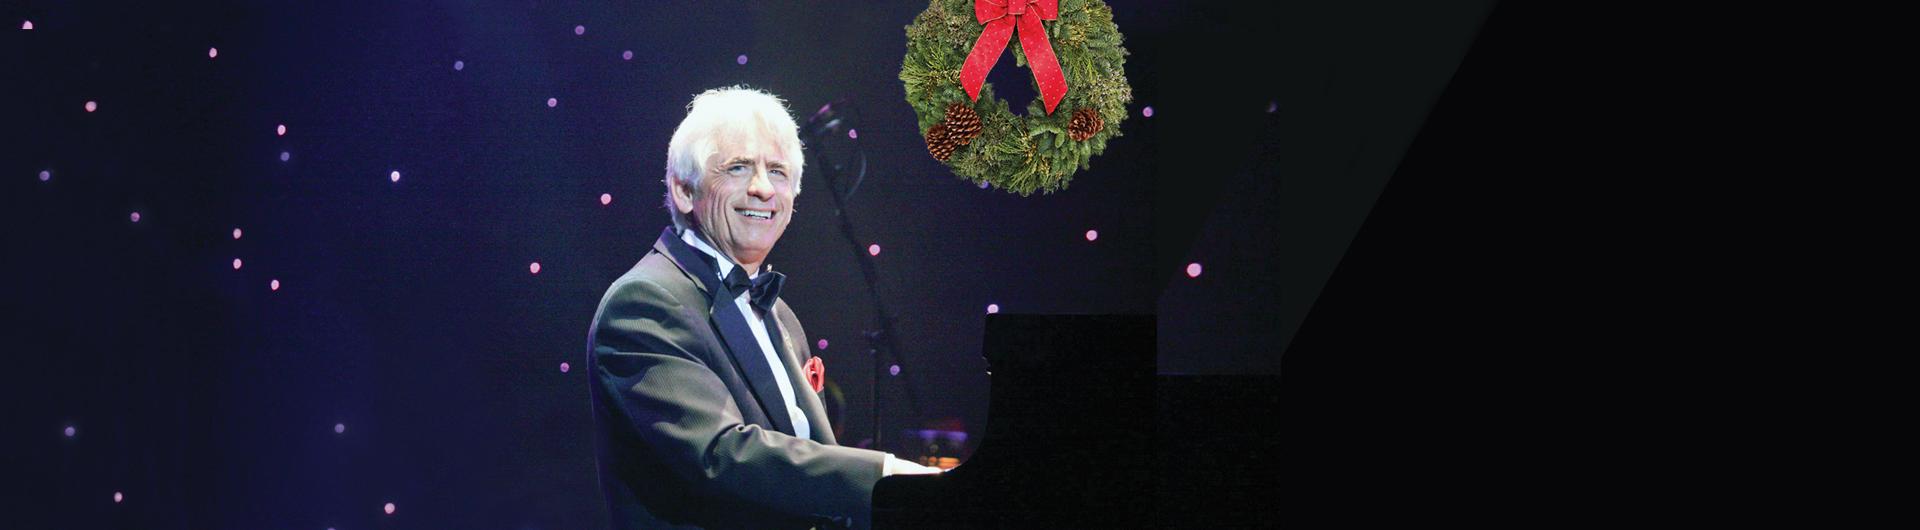 David Benoit sits smiling at a grand piano, the background filled with pinpricks for stars, a holiday wreath overhead.